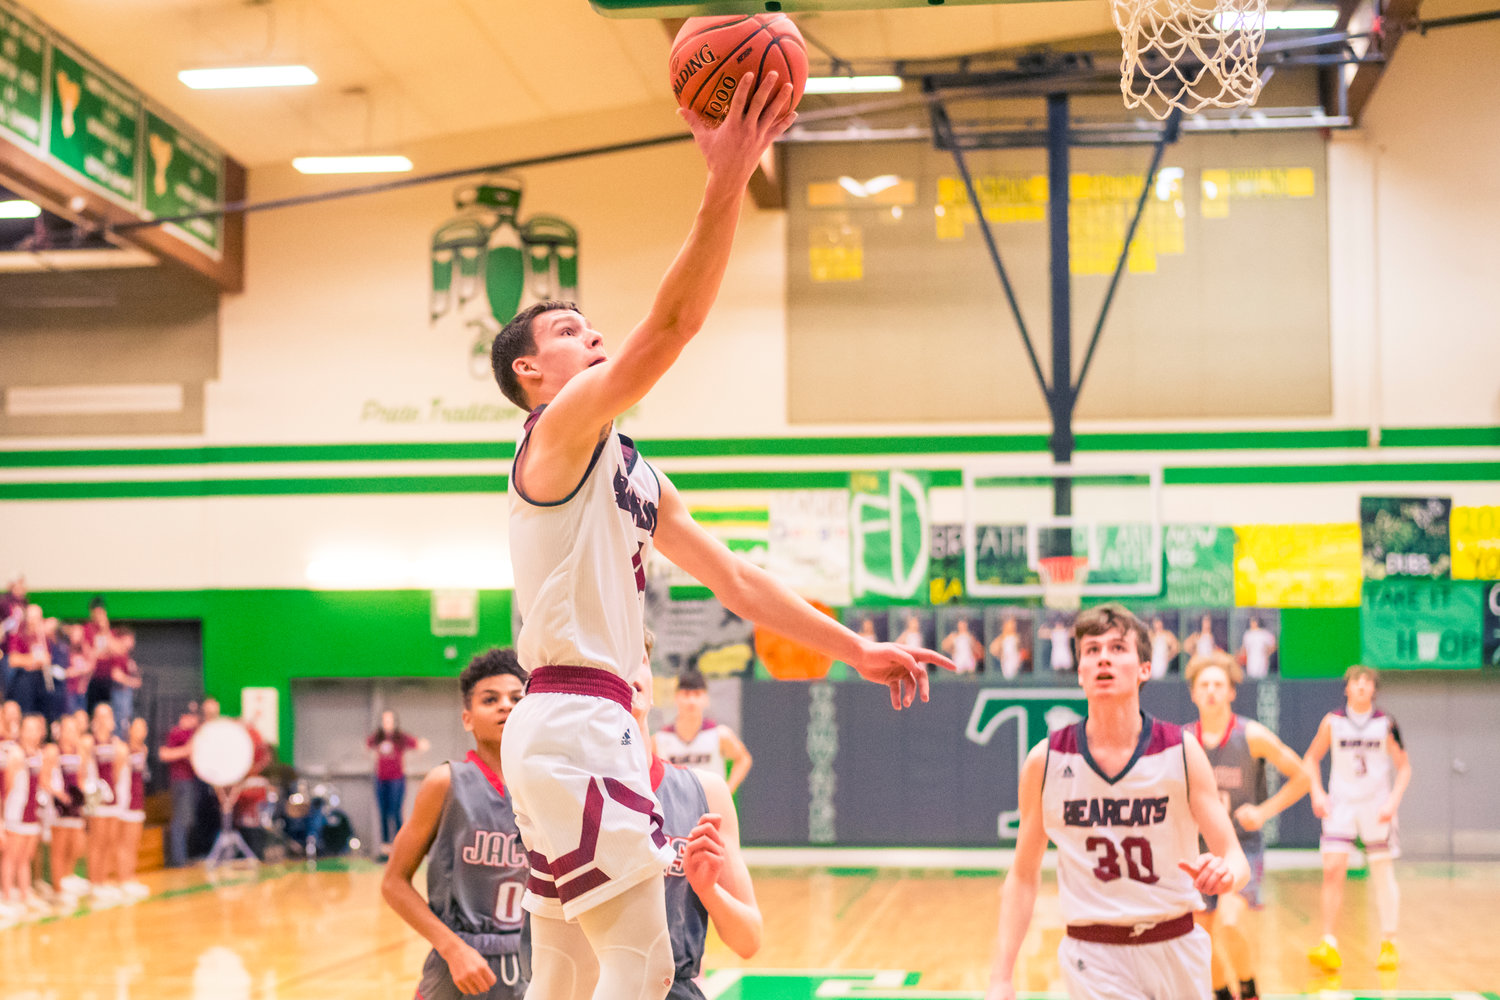 W.F. West's Cade Haller (4) makes a layup during a game against Jacks Thursday night at Tumwater High School.